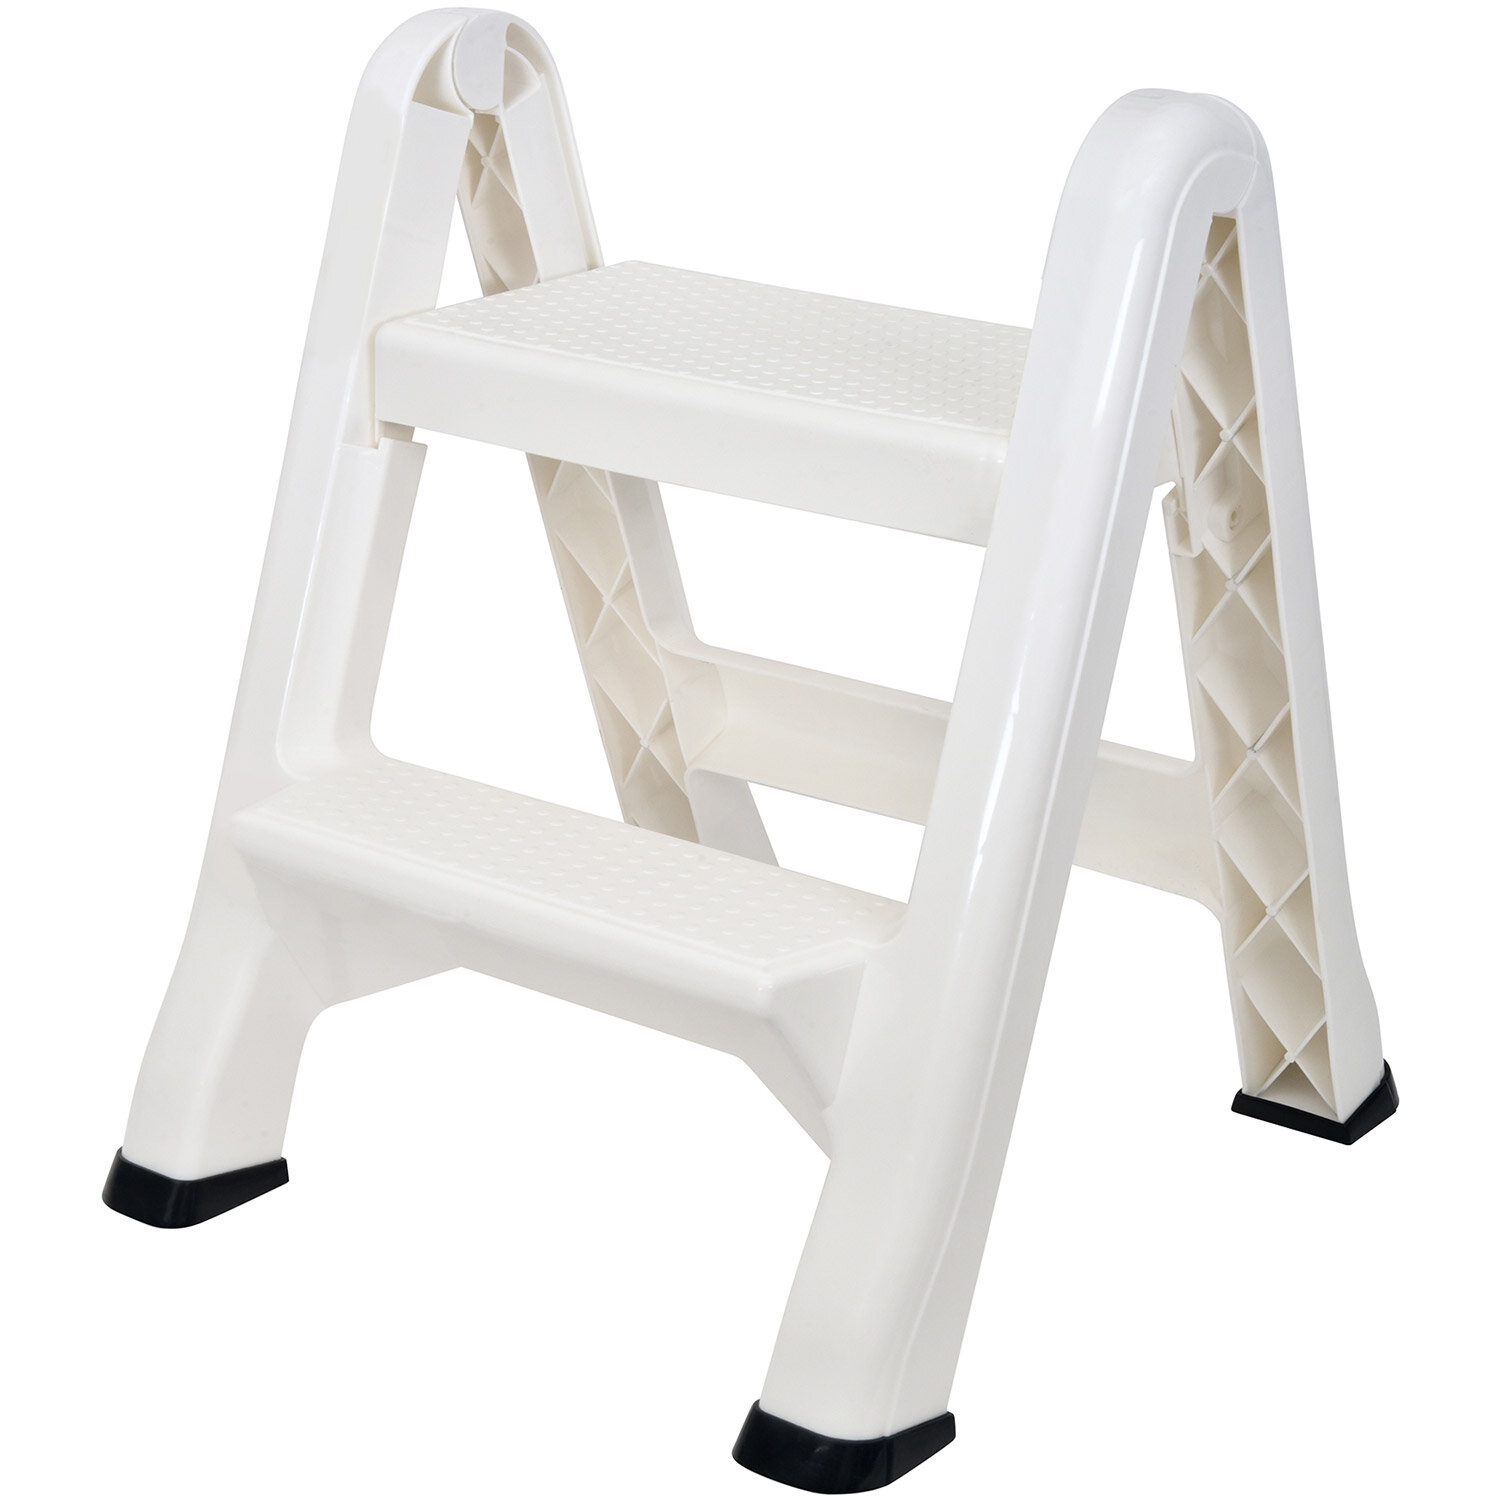 Wfx Utility Wendover 2 Step Plastic Step Stool With 250 Lb Load Capacity Reviews Wayfair